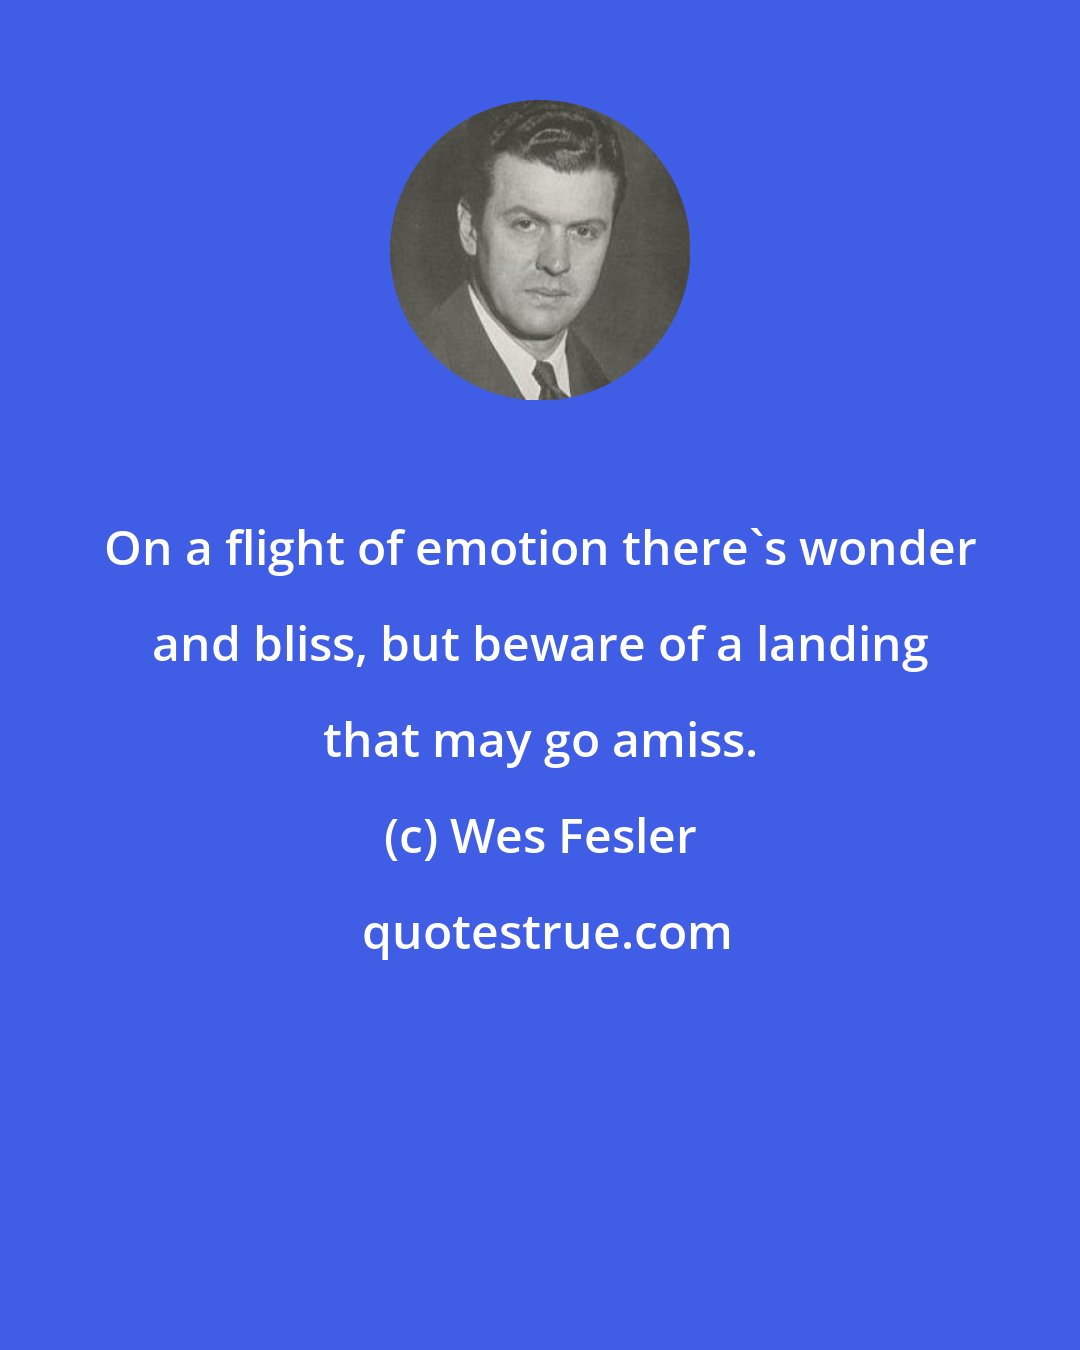 Wes Fesler: On a flight of emotion there's wonder and bliss, but beware of a landing that may go amiss.